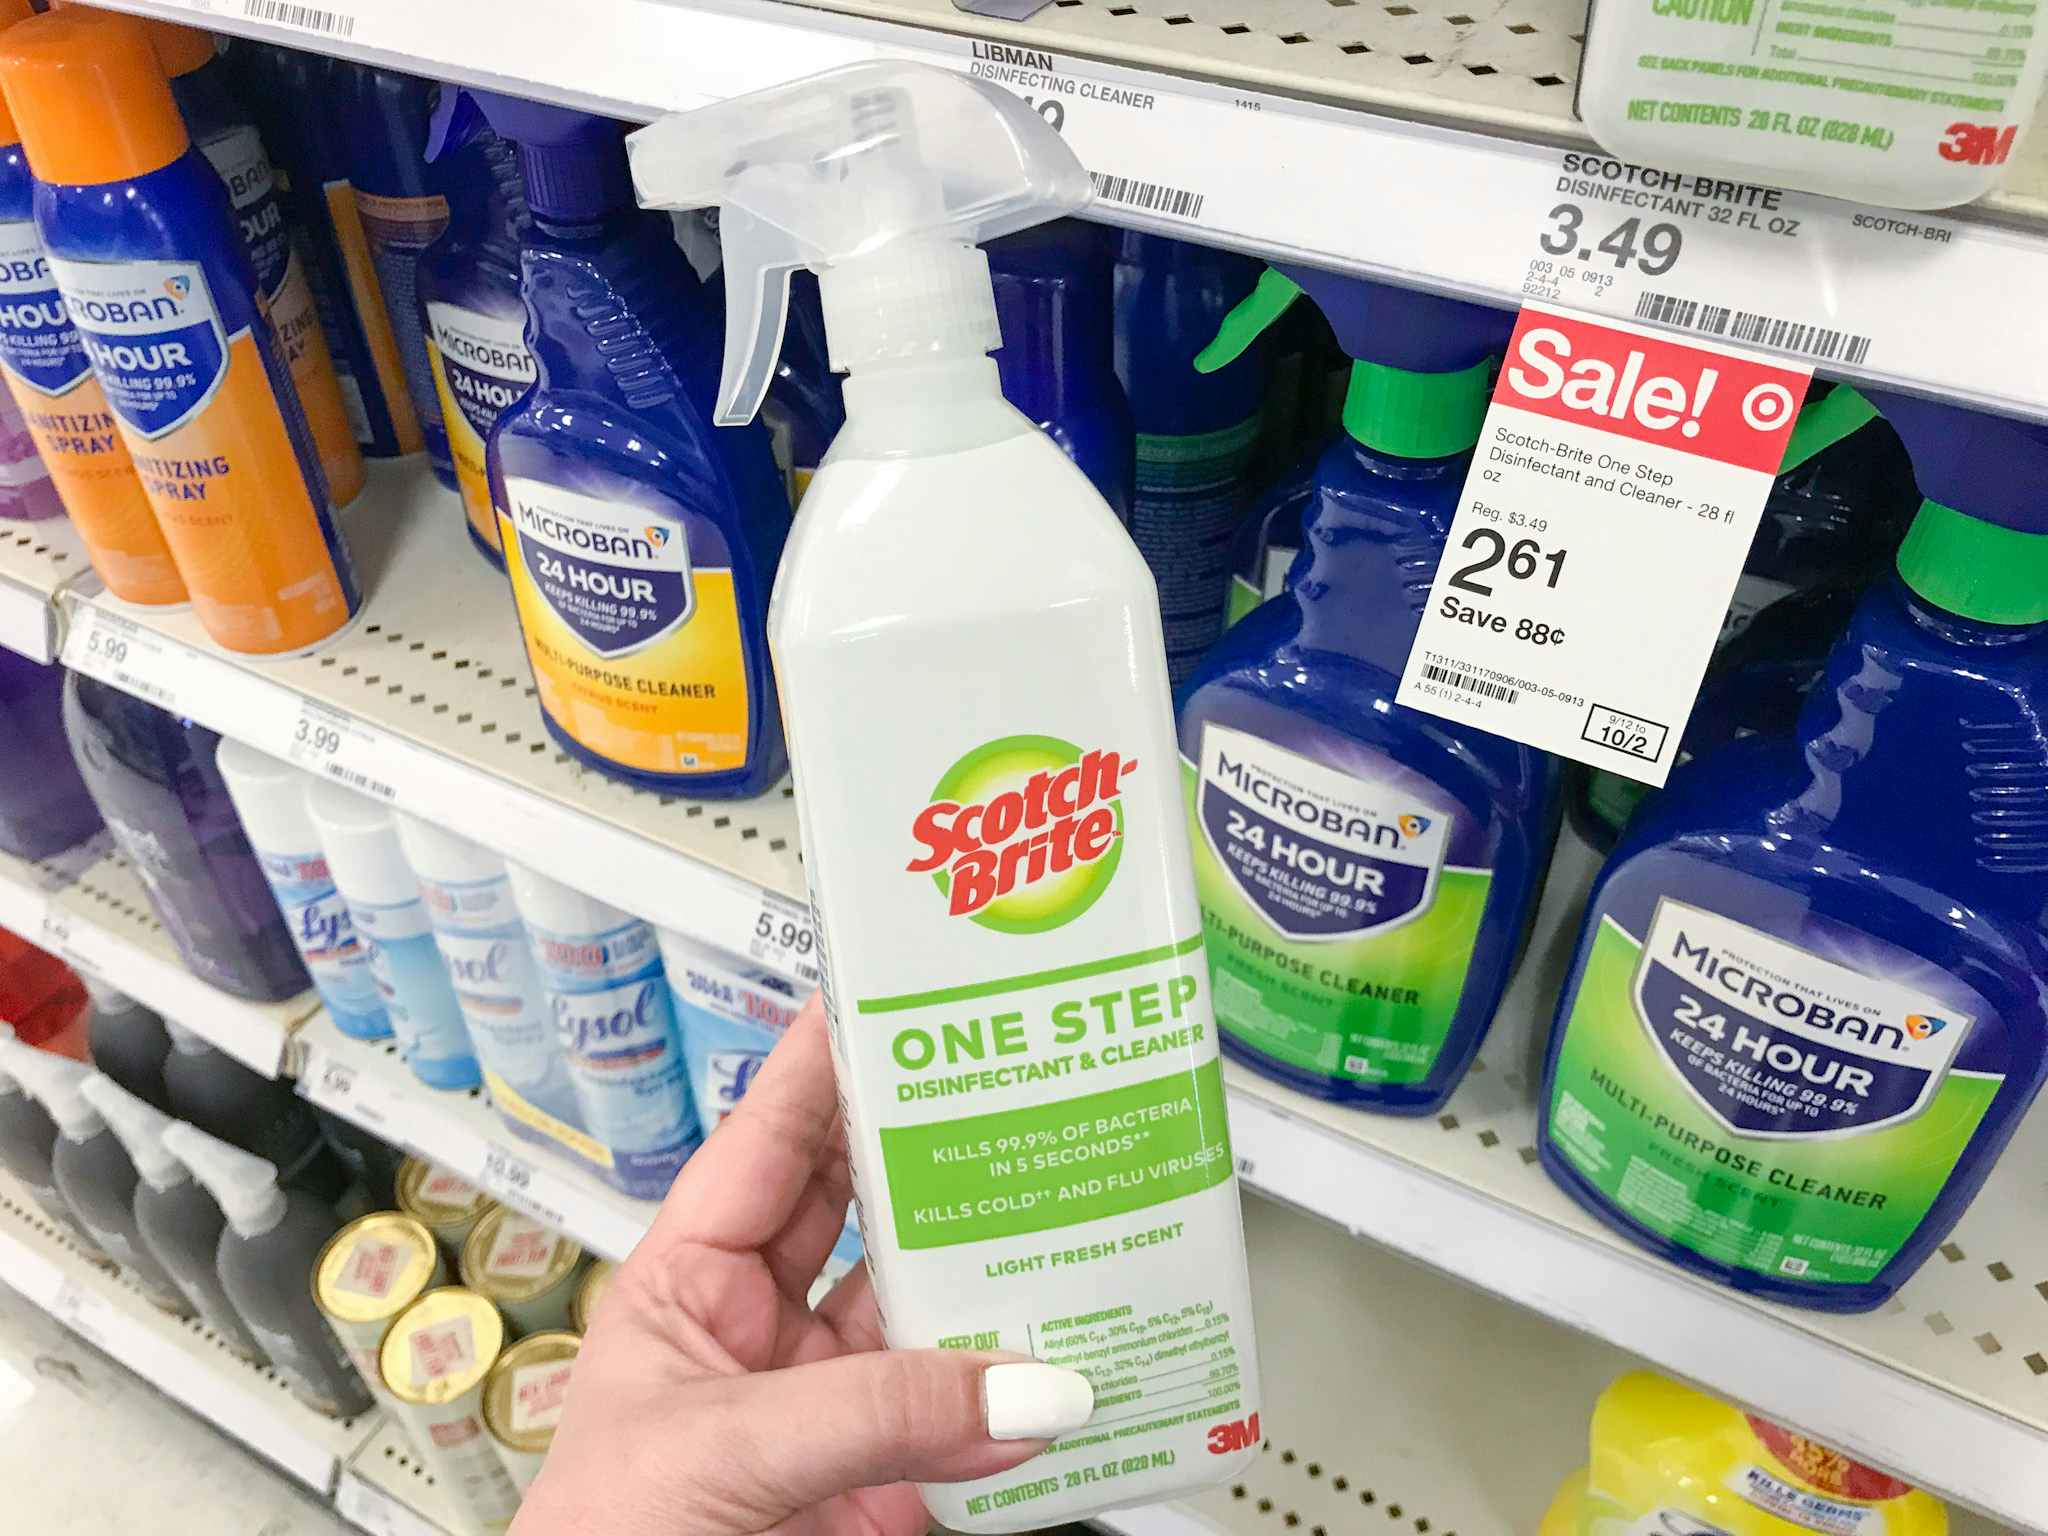 hand holding scotch-brite cleaner at target